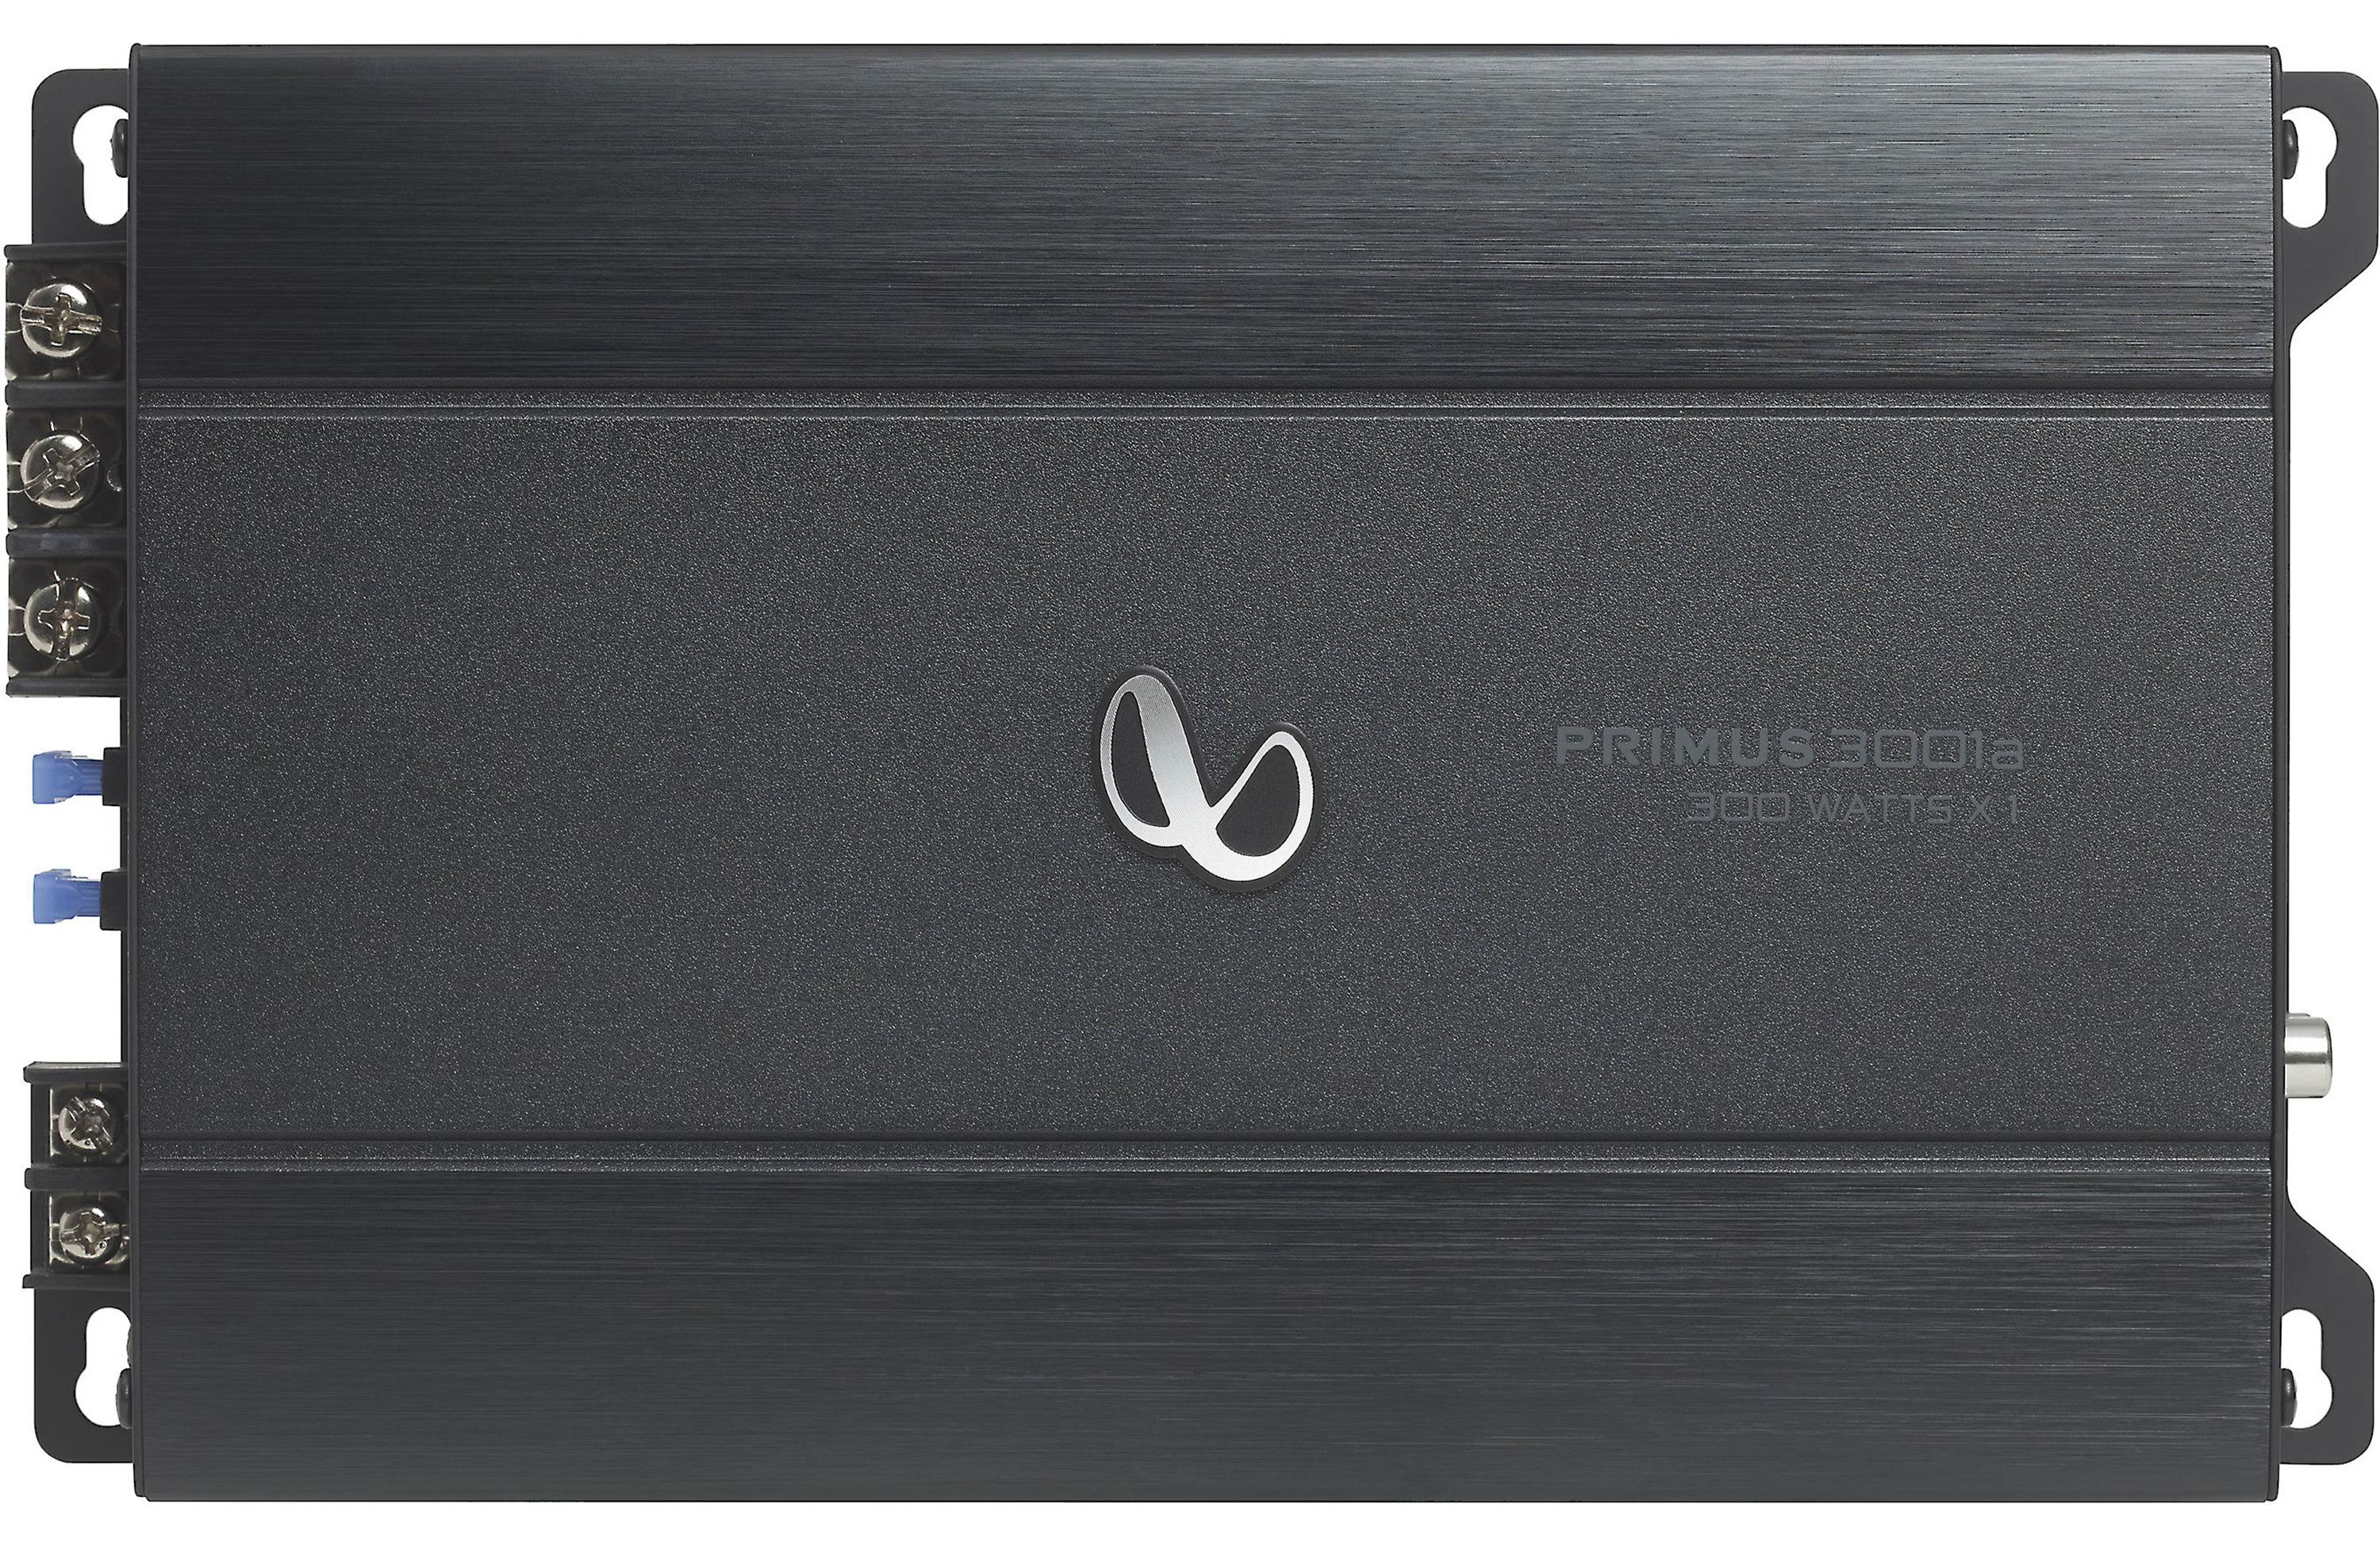 Infinity Primus 3000A